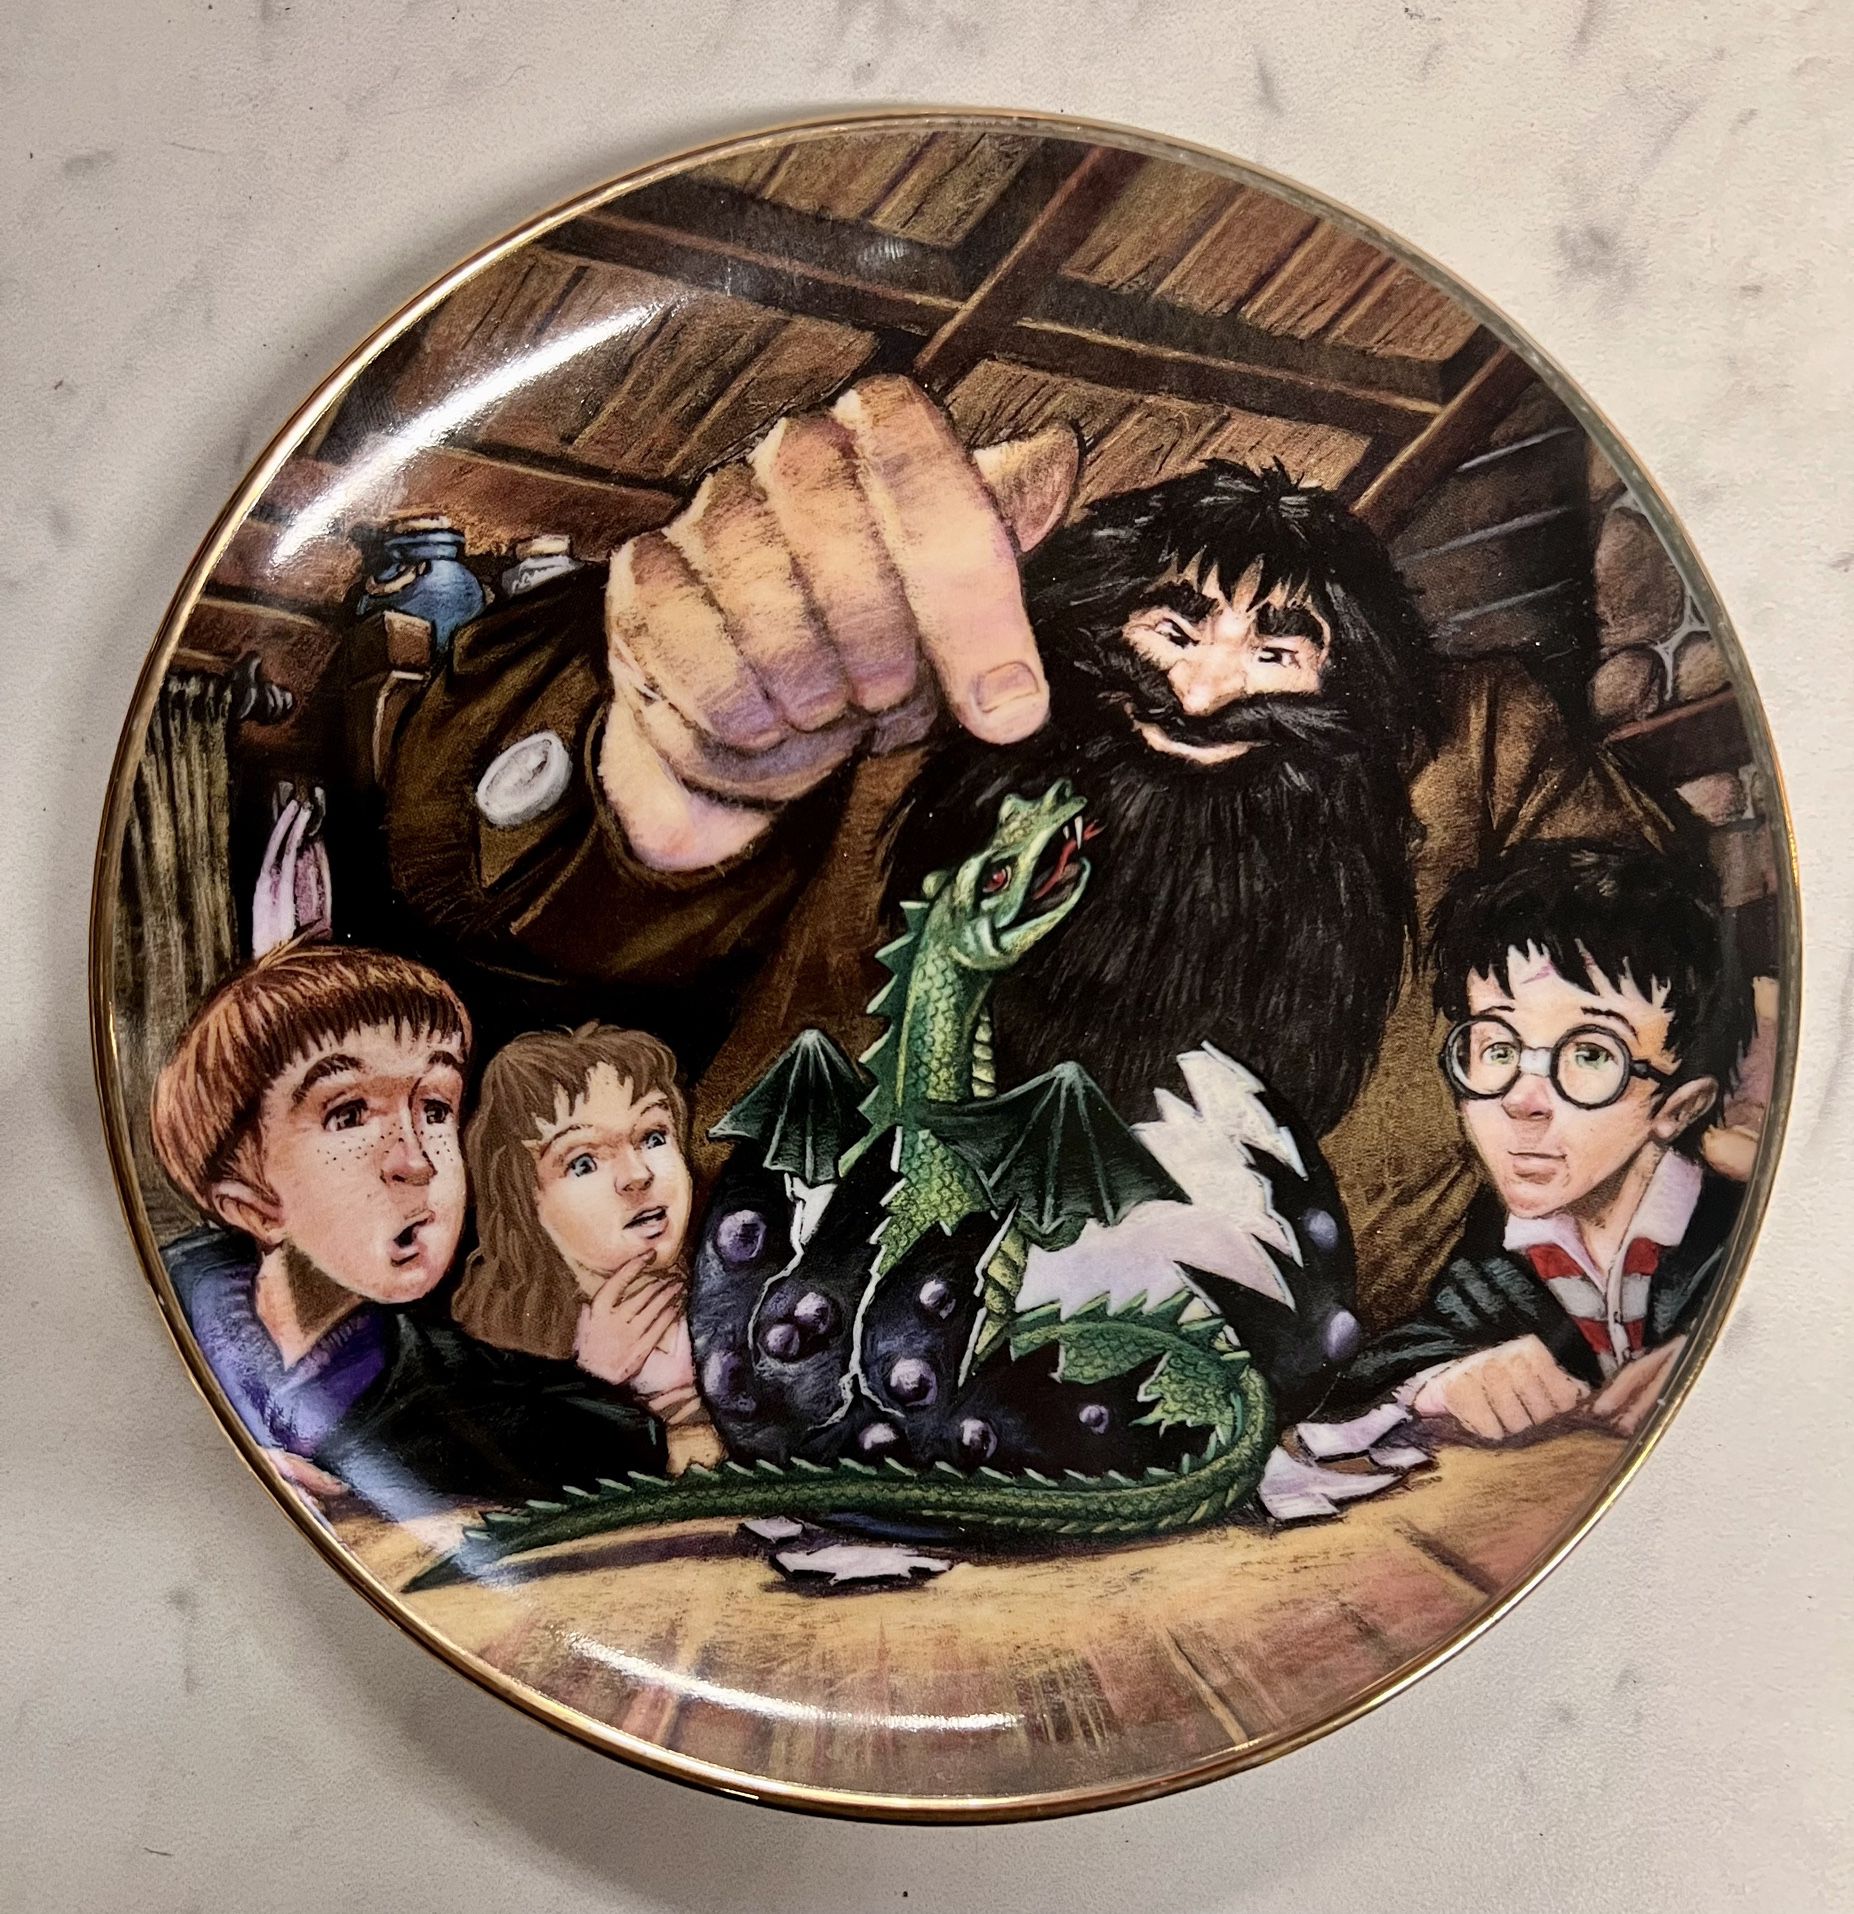  2001 HARRY POTTER Royal Doulton Collector Plate BIRTH OF NORBERT HPWP3.